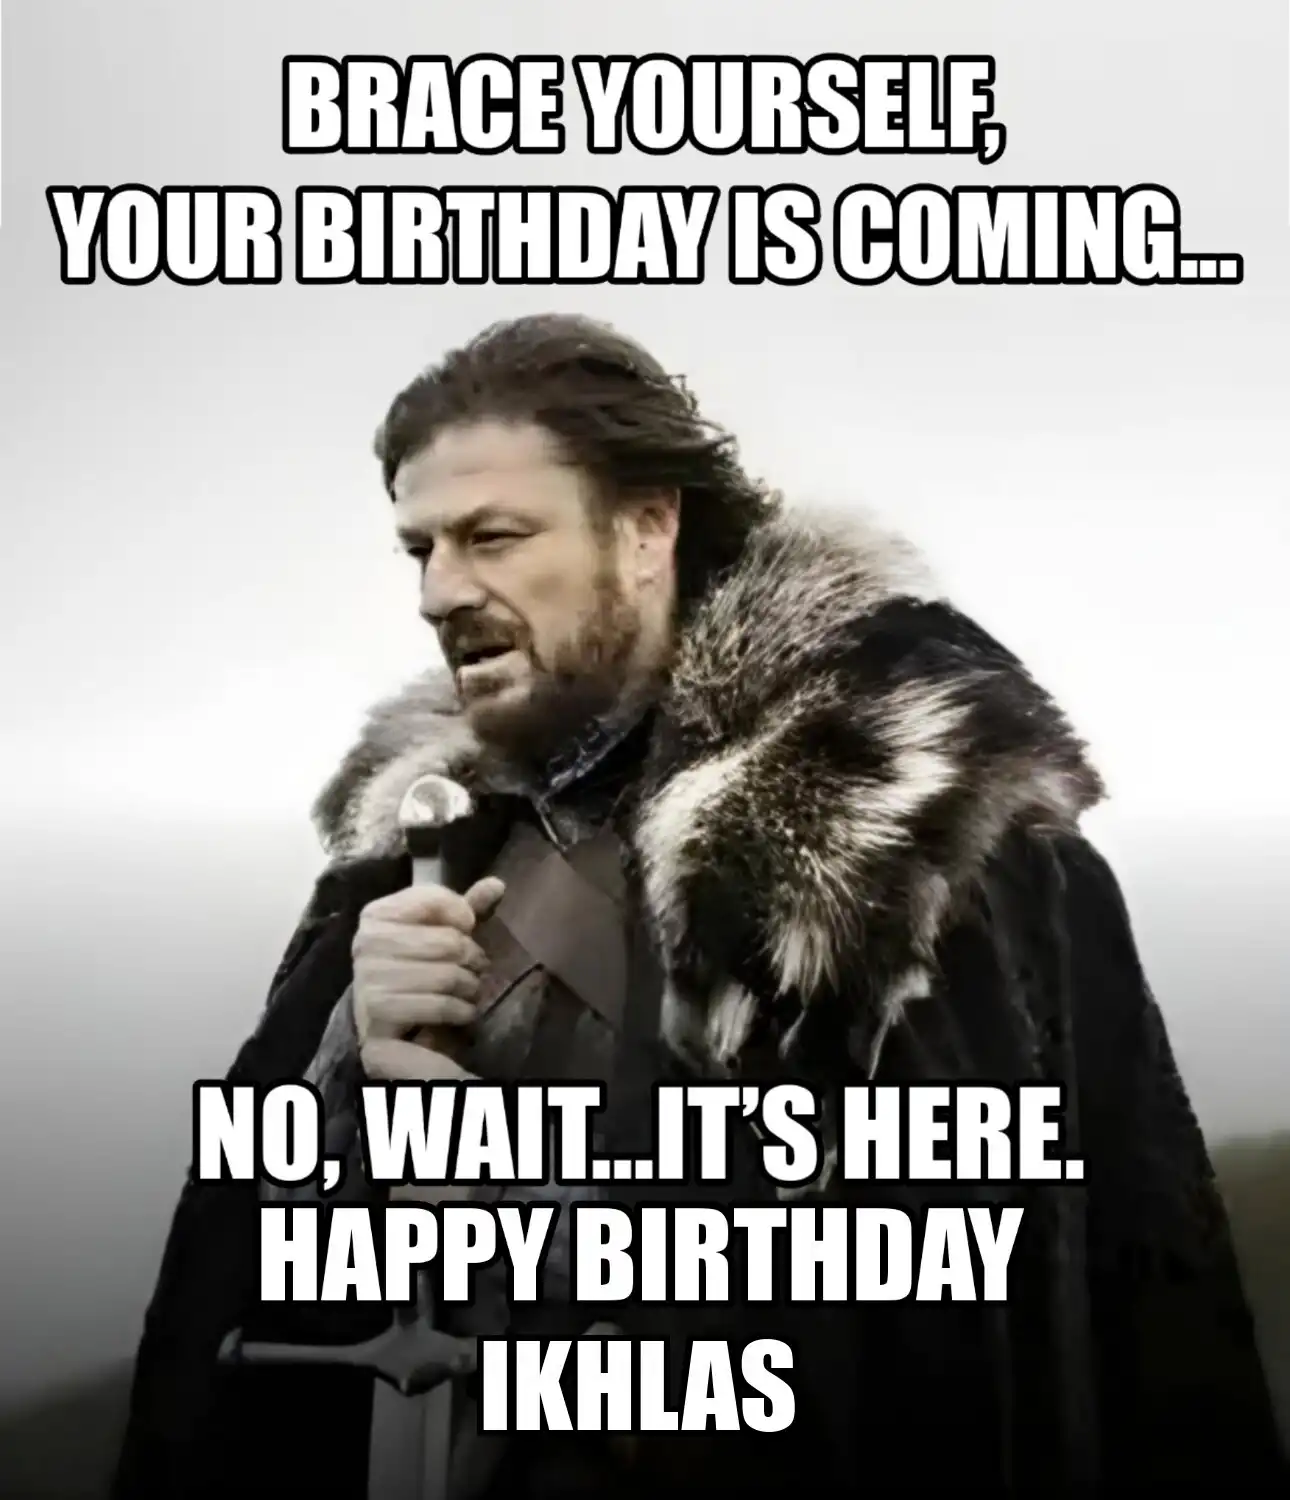 Happy Birthday Ikhlas Brace Yourself Your Birthday Is Coming Meme